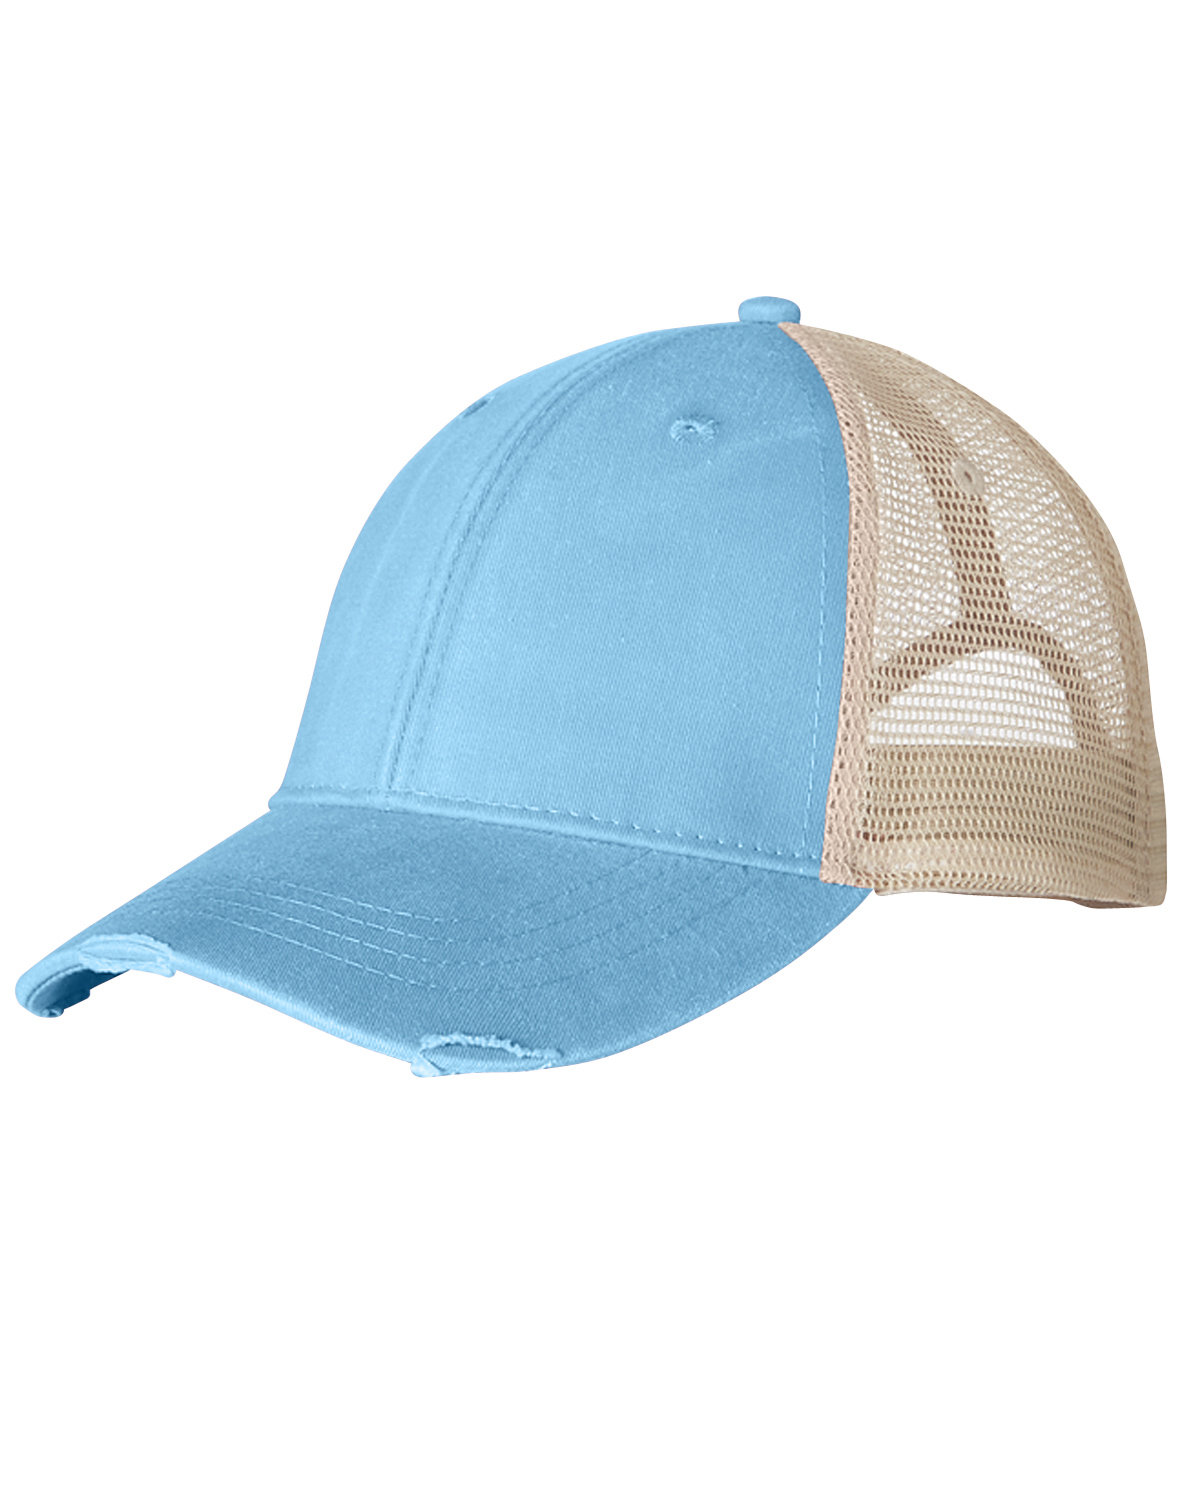 click to view BABY BLUE/ TAN